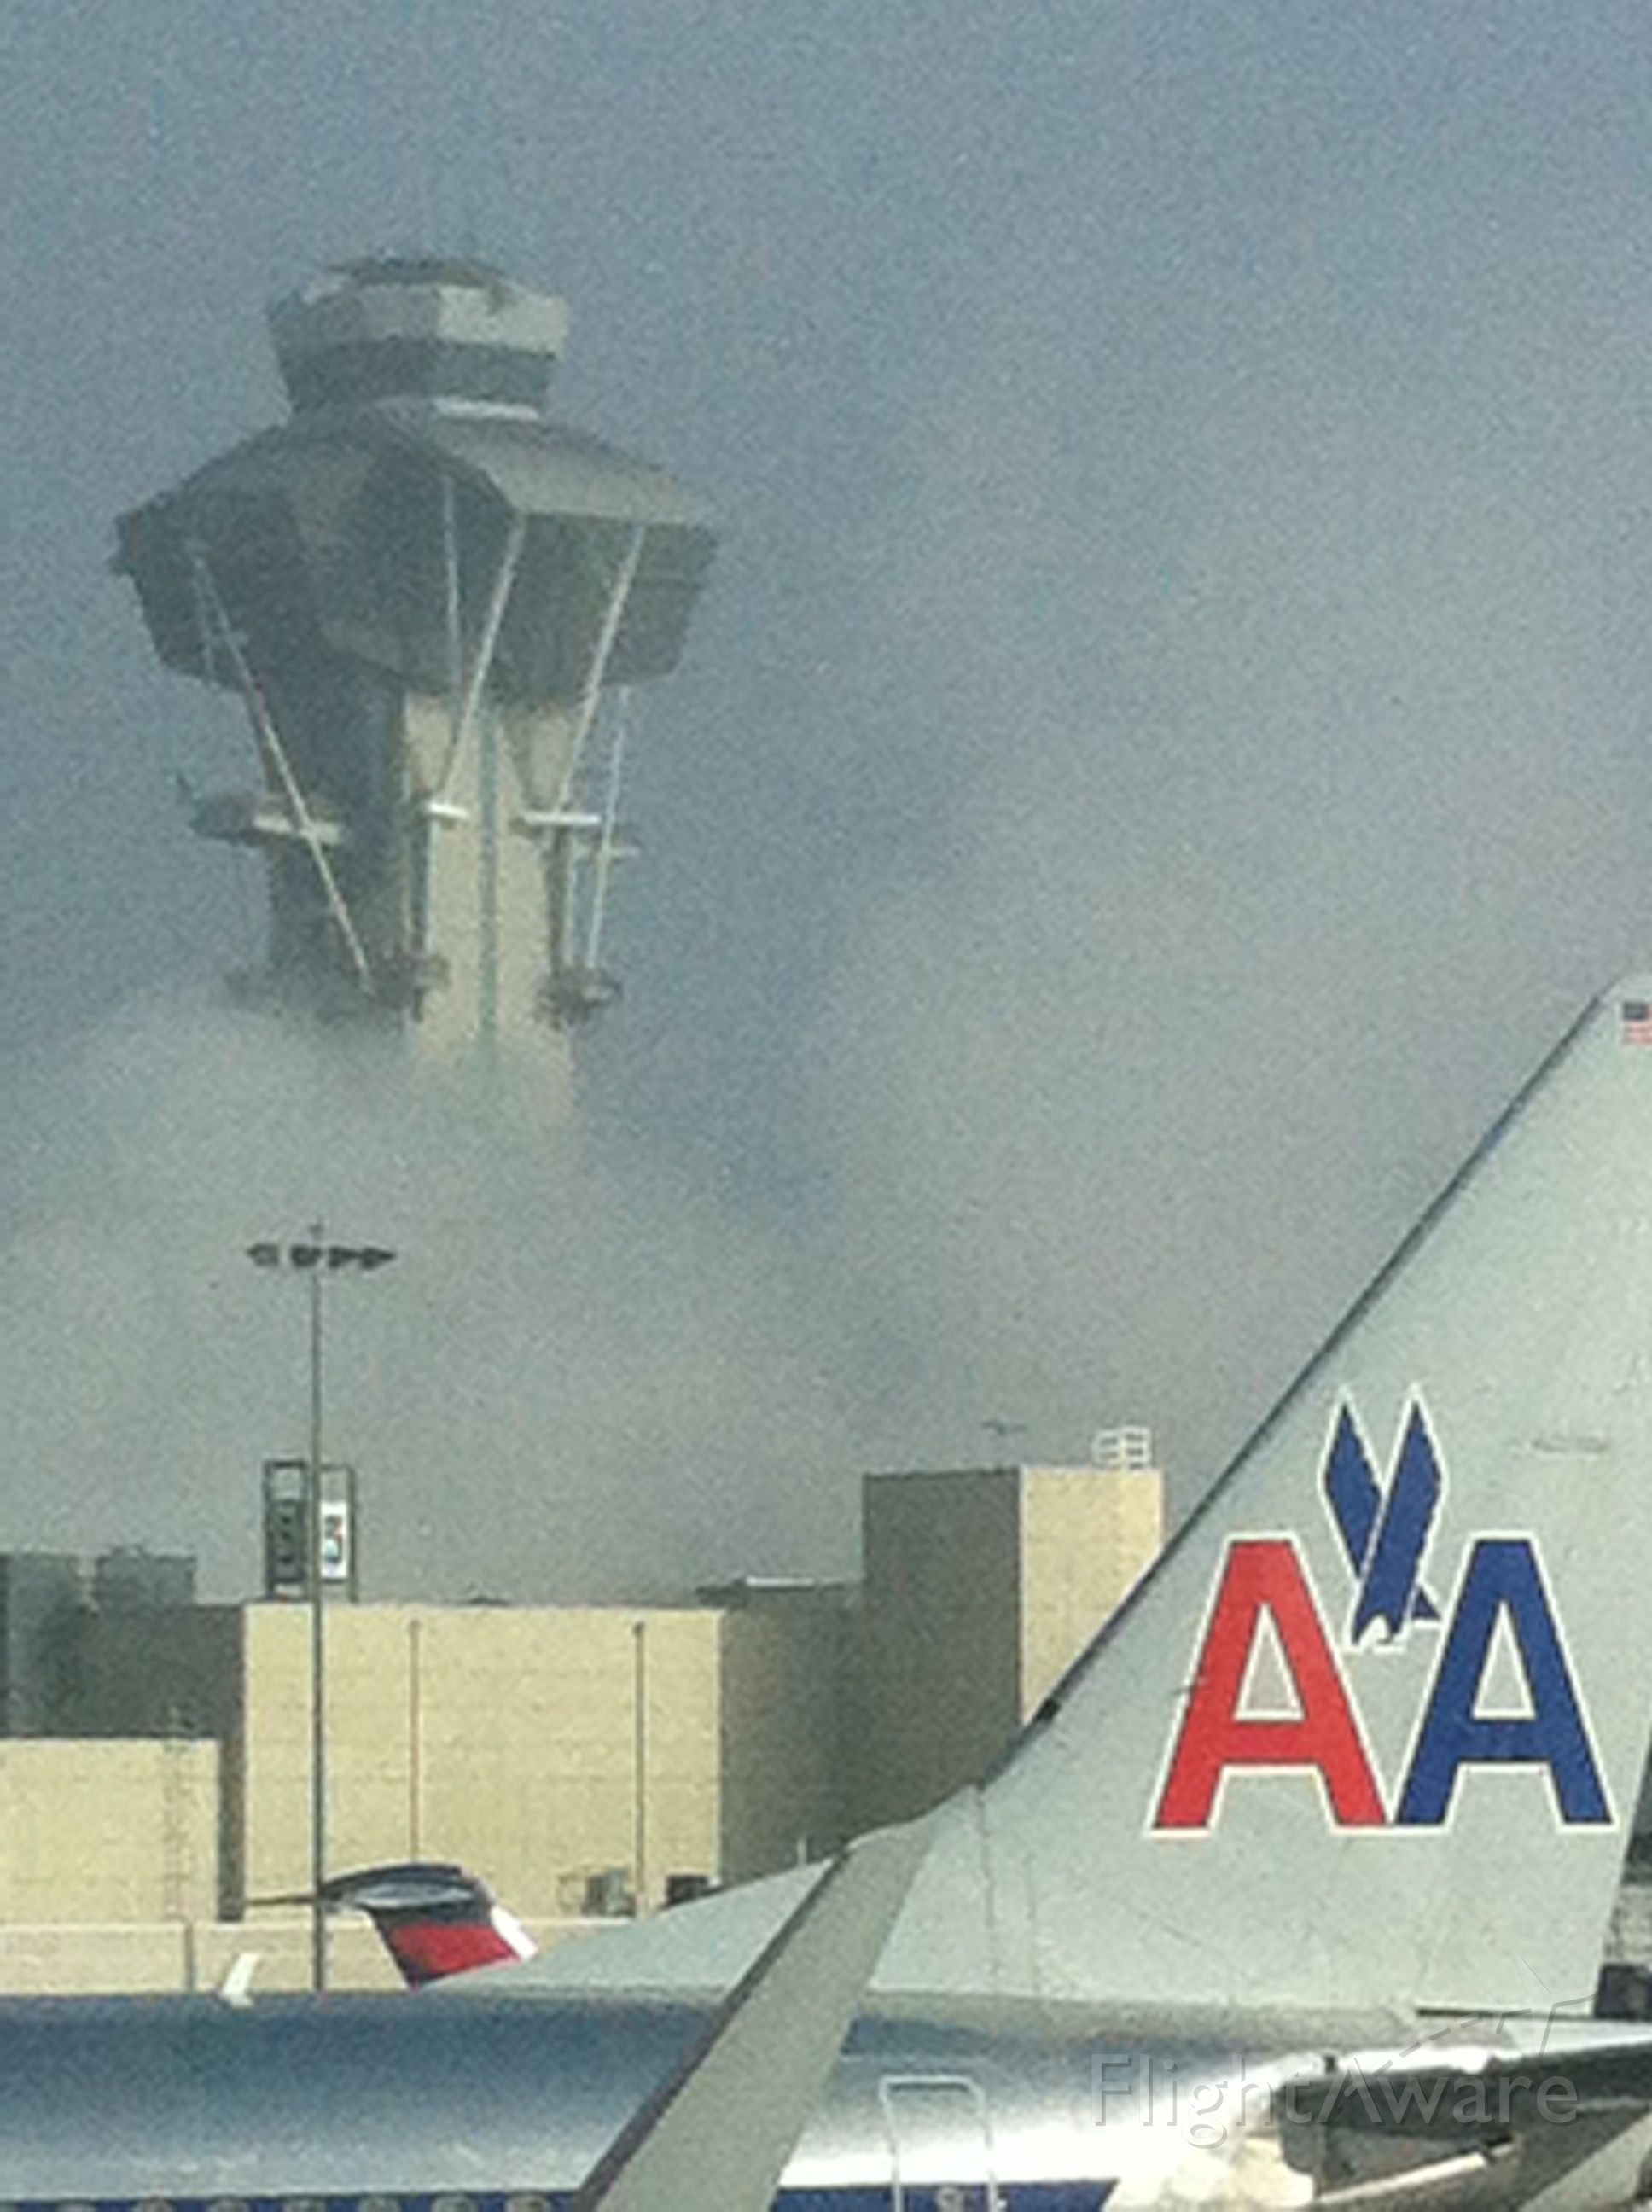 — — - LAX tower emerging from the fog